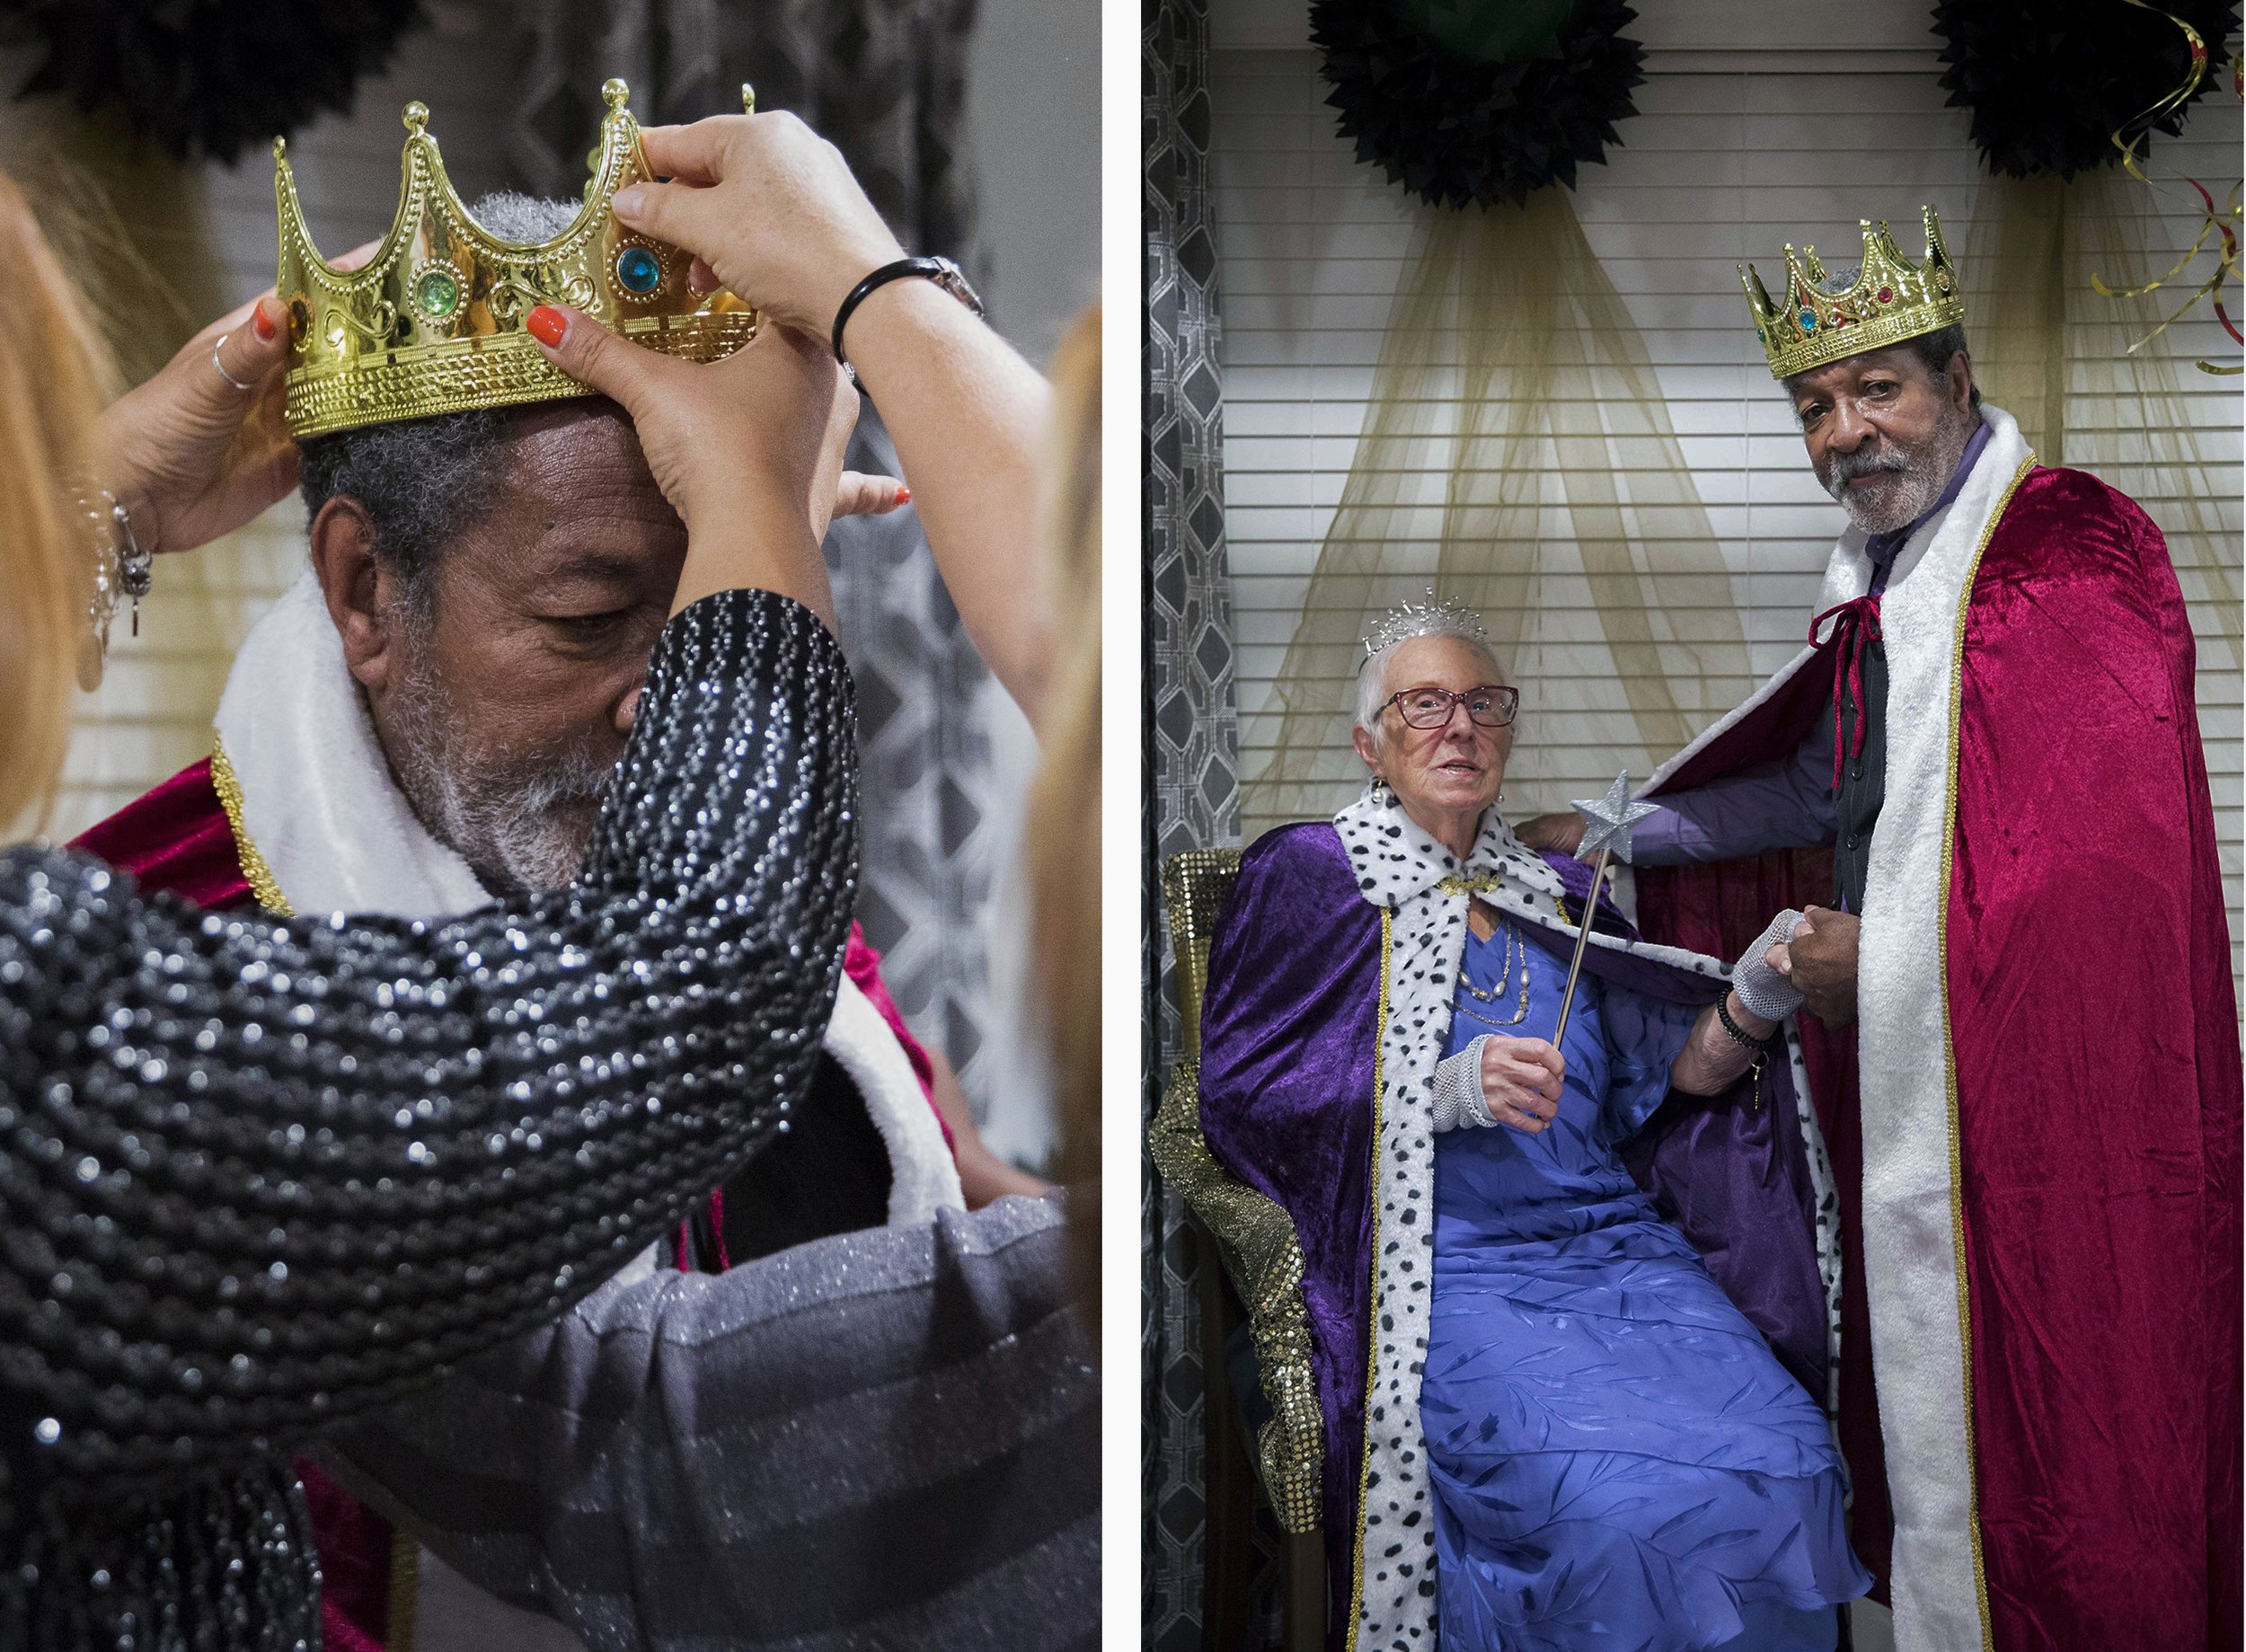   (RIGHT) Rita (left) and Robert, the “senior prom" king and queen, pose for a photo after receiving their crowns on November 21, 2019. Robert has since died from COVID-19. 